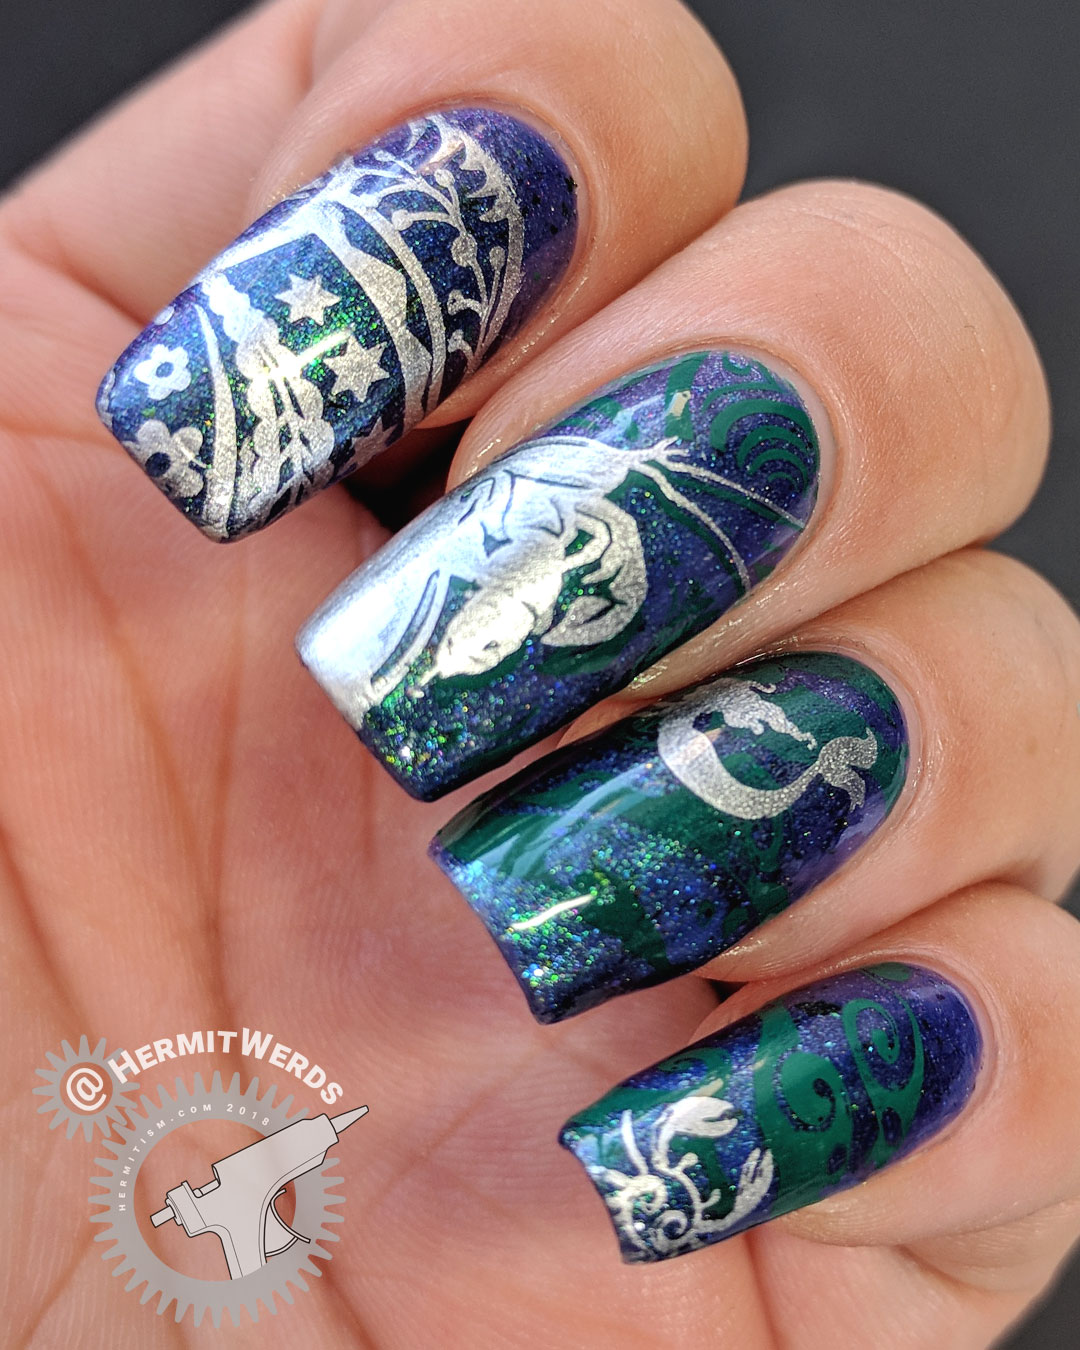 My Mermaid Has Crabs - Hermit Werds - indigo jelly with green to gold multichrome shimmer base with dark green and silver mermaid and giant crab nail stamps